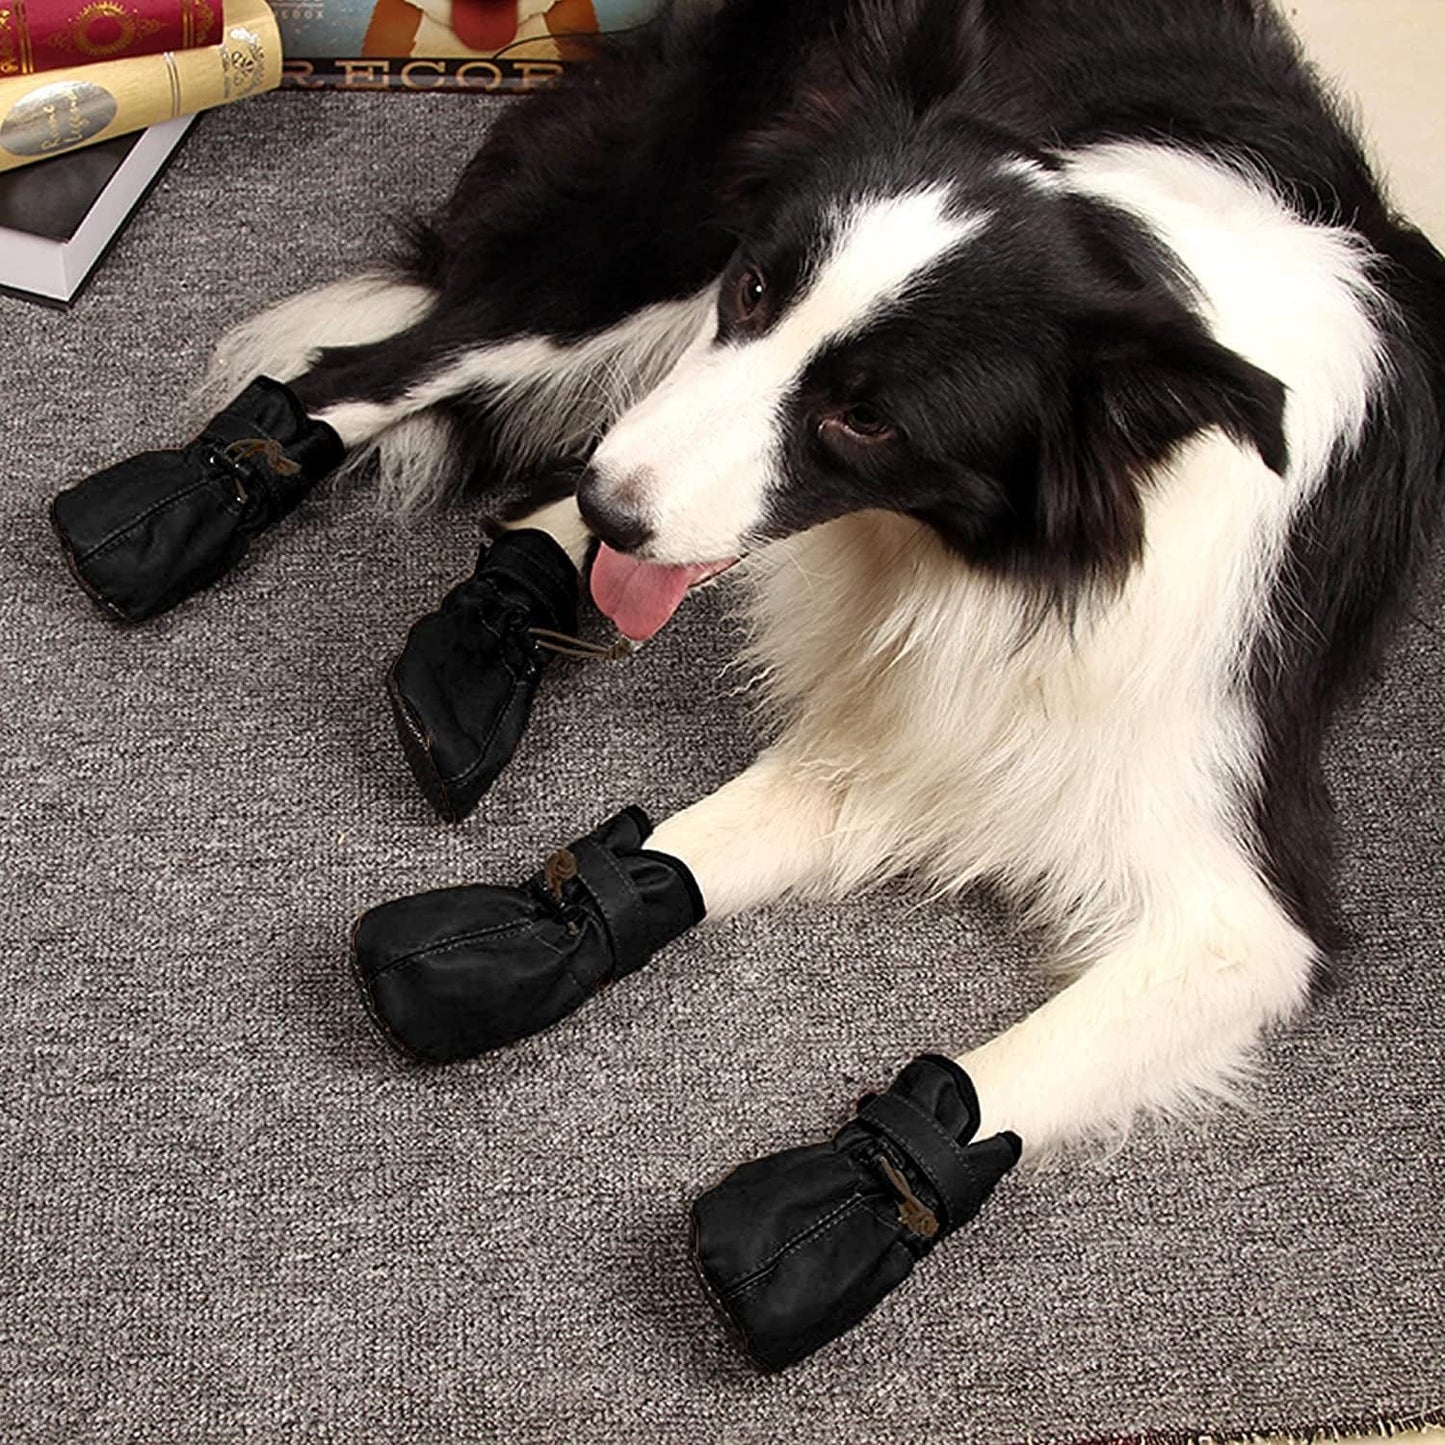 YAODHAOD Dog Shoes for Large Dogs, Dog Boots Paw Protectors for Hot Pavement, Leather Anti-Slip Adjustable Booties,For Indoor Hardwood Floor Traction Control & Outdoor Wlaking Hikin (Size 8, Black) Animals & Pet Supplies > Pet Supplies > Dog Supplies > Dog Apparel YAODHAOD   